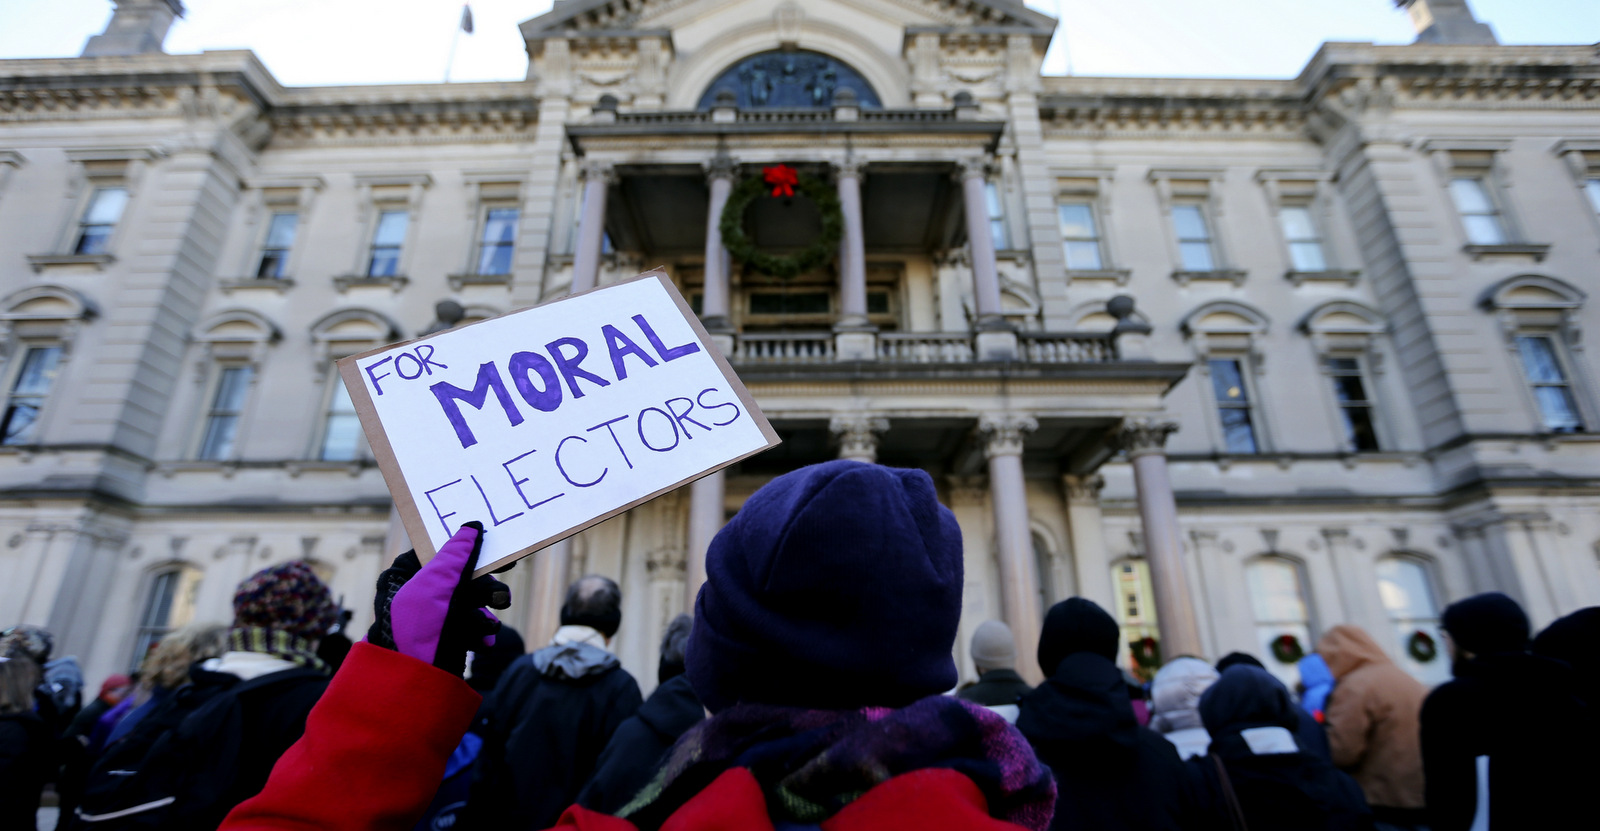 A protester holds up a sign as a group demonstrates in freezing temperatures at the Statehouse, ahead of New Jersey's Electoral College, Monday, Dec. 19, 2016, in Trenton, N.J. (AP/Mel Evans)